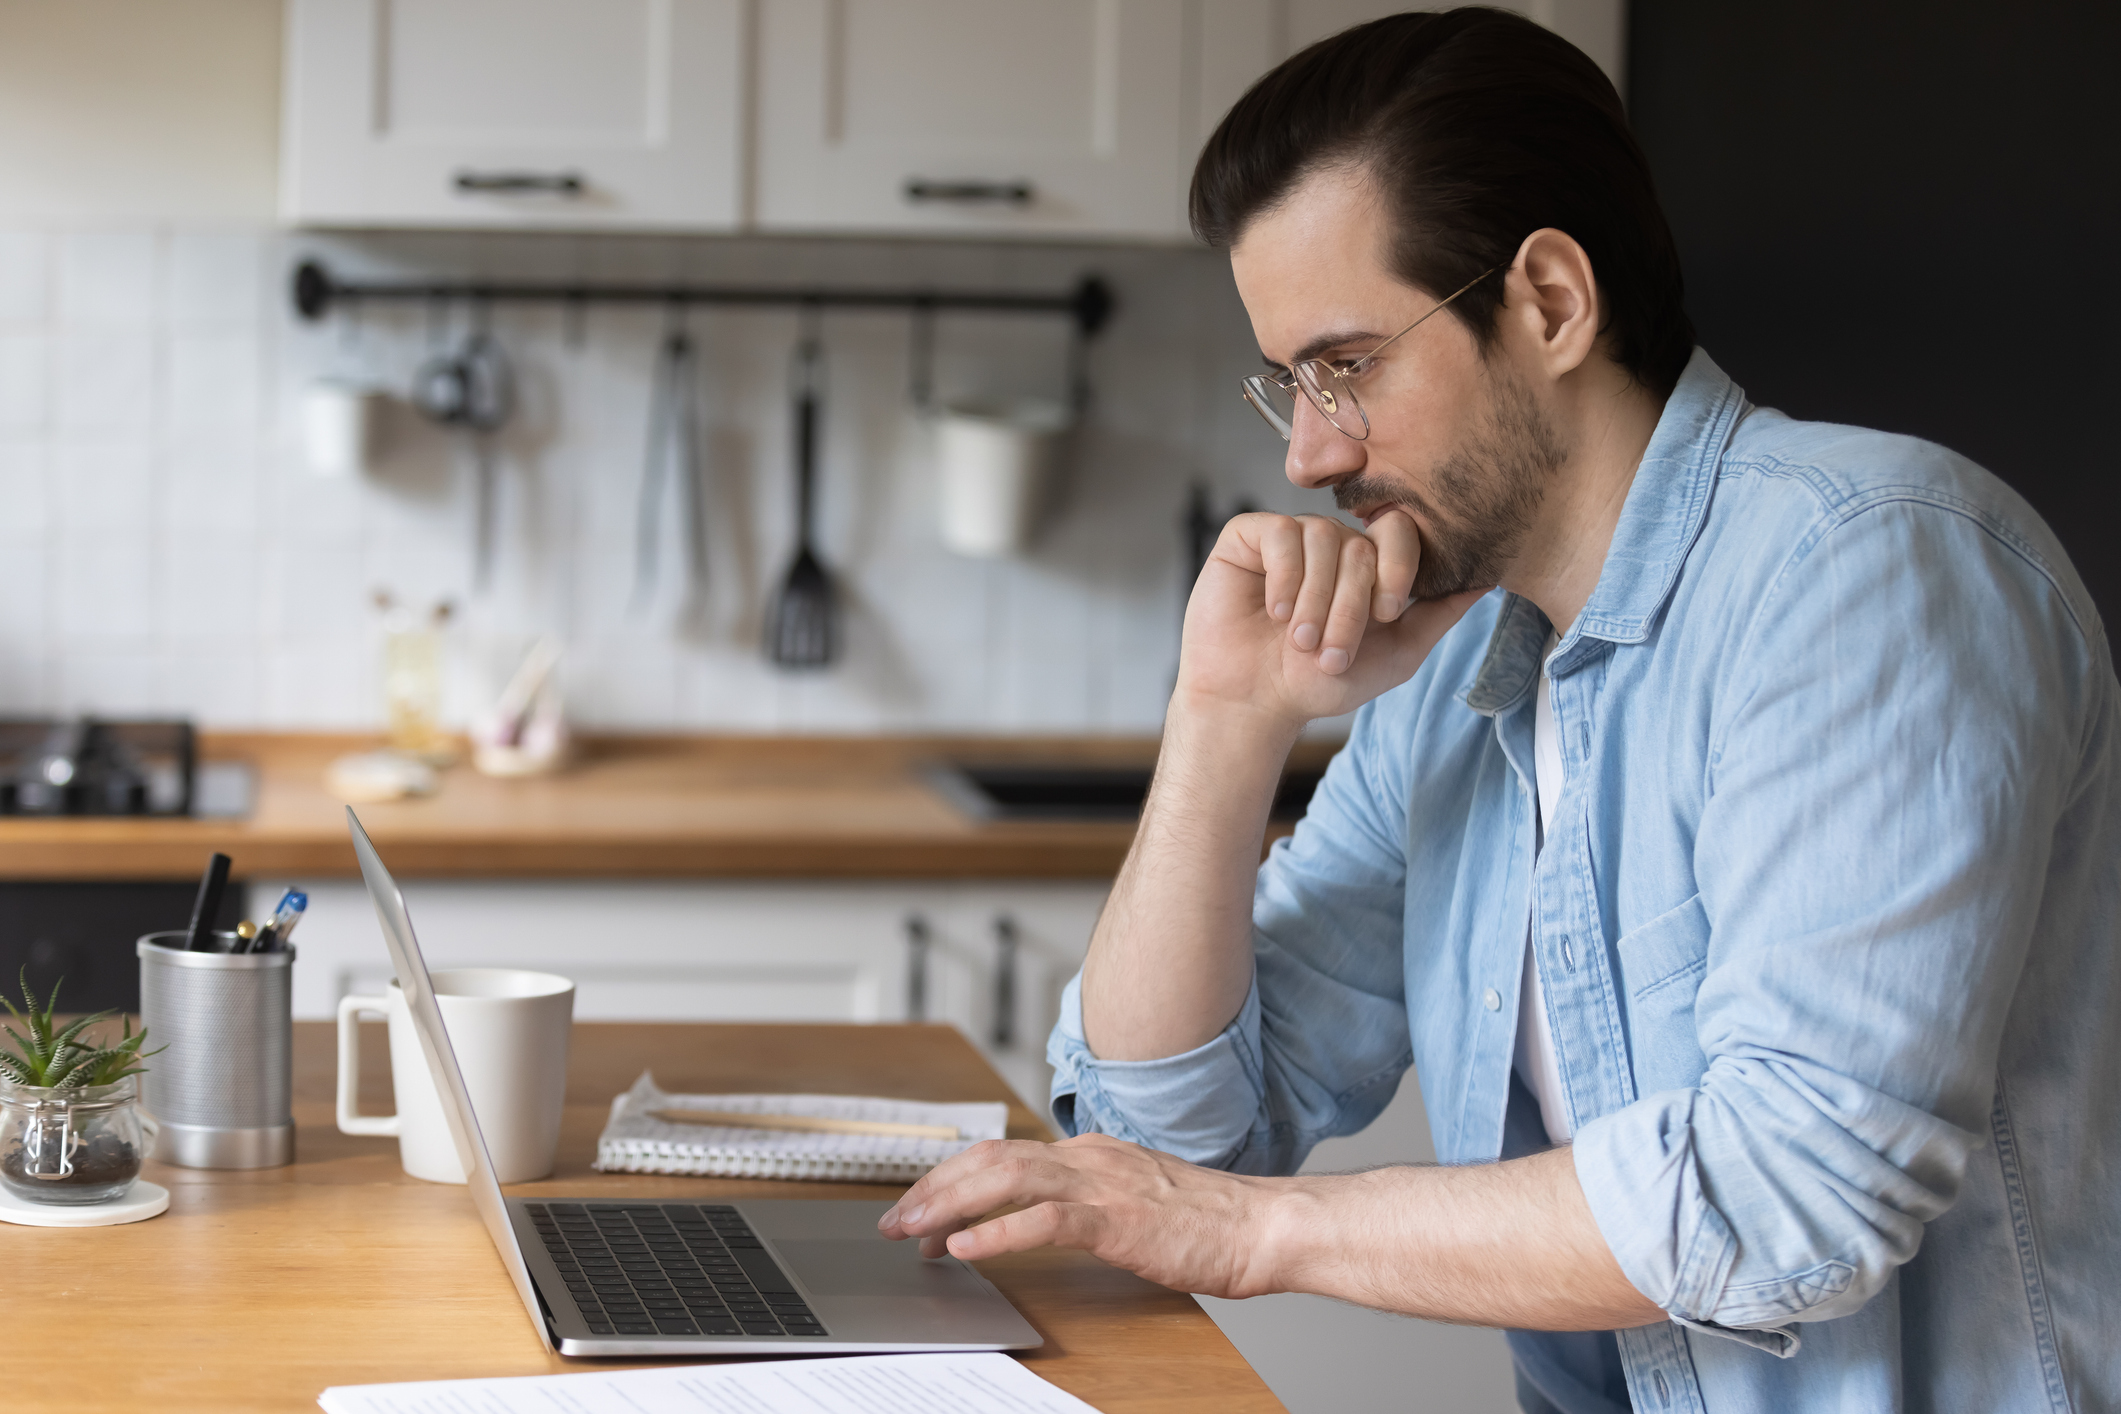 Stock photo of side view of a man sitting in kitchen and looking at his laptop with his right hand under his chin and left hand on the keyboard.